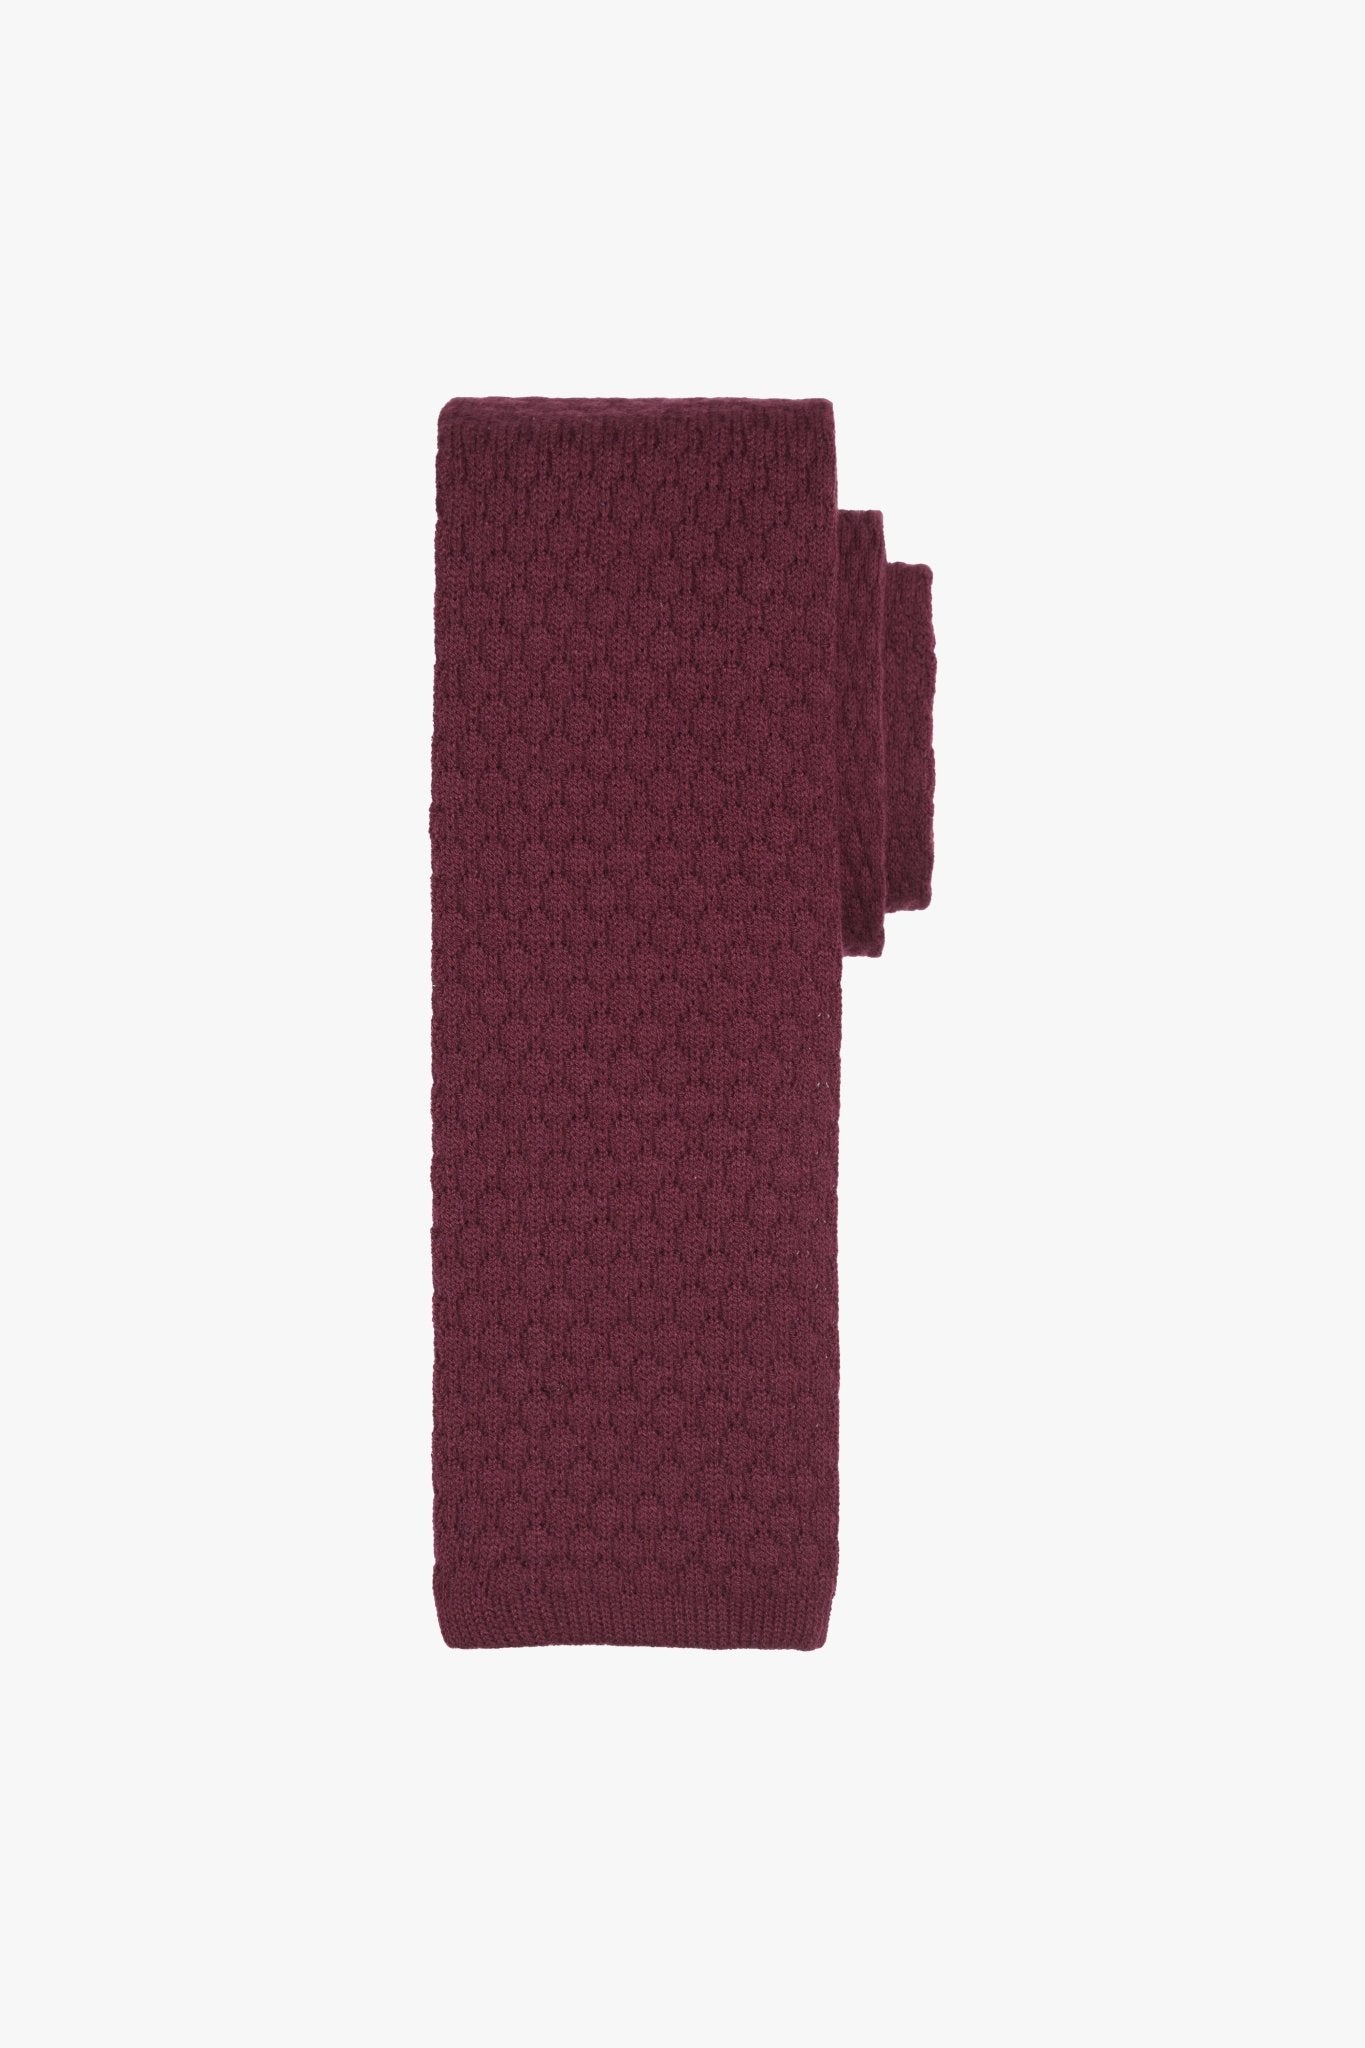 Burgundy Knitted Tie - My Suited Life